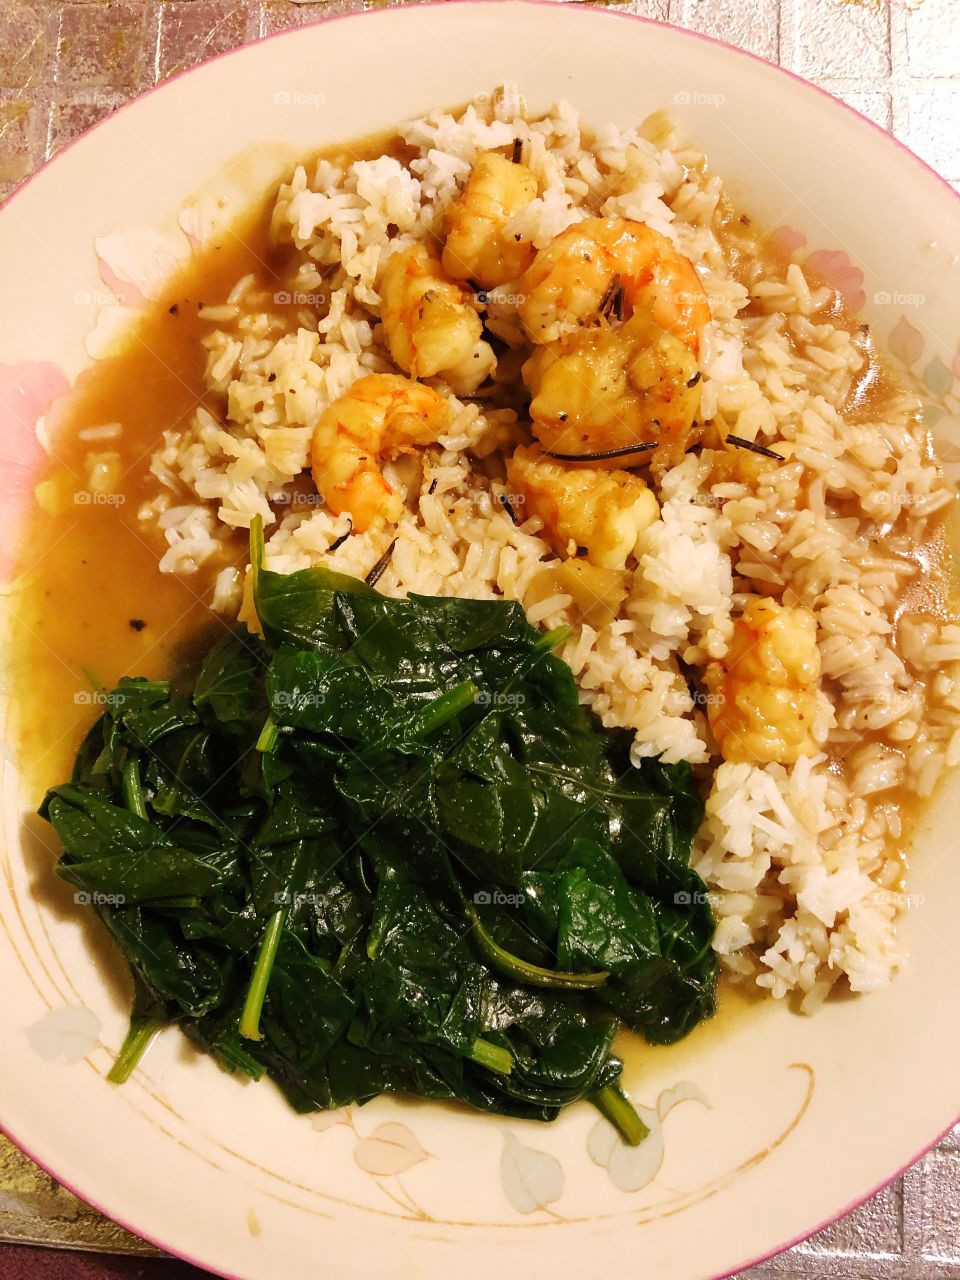 Nothing like shrimp and gravy and some spinach...Mina 1017 